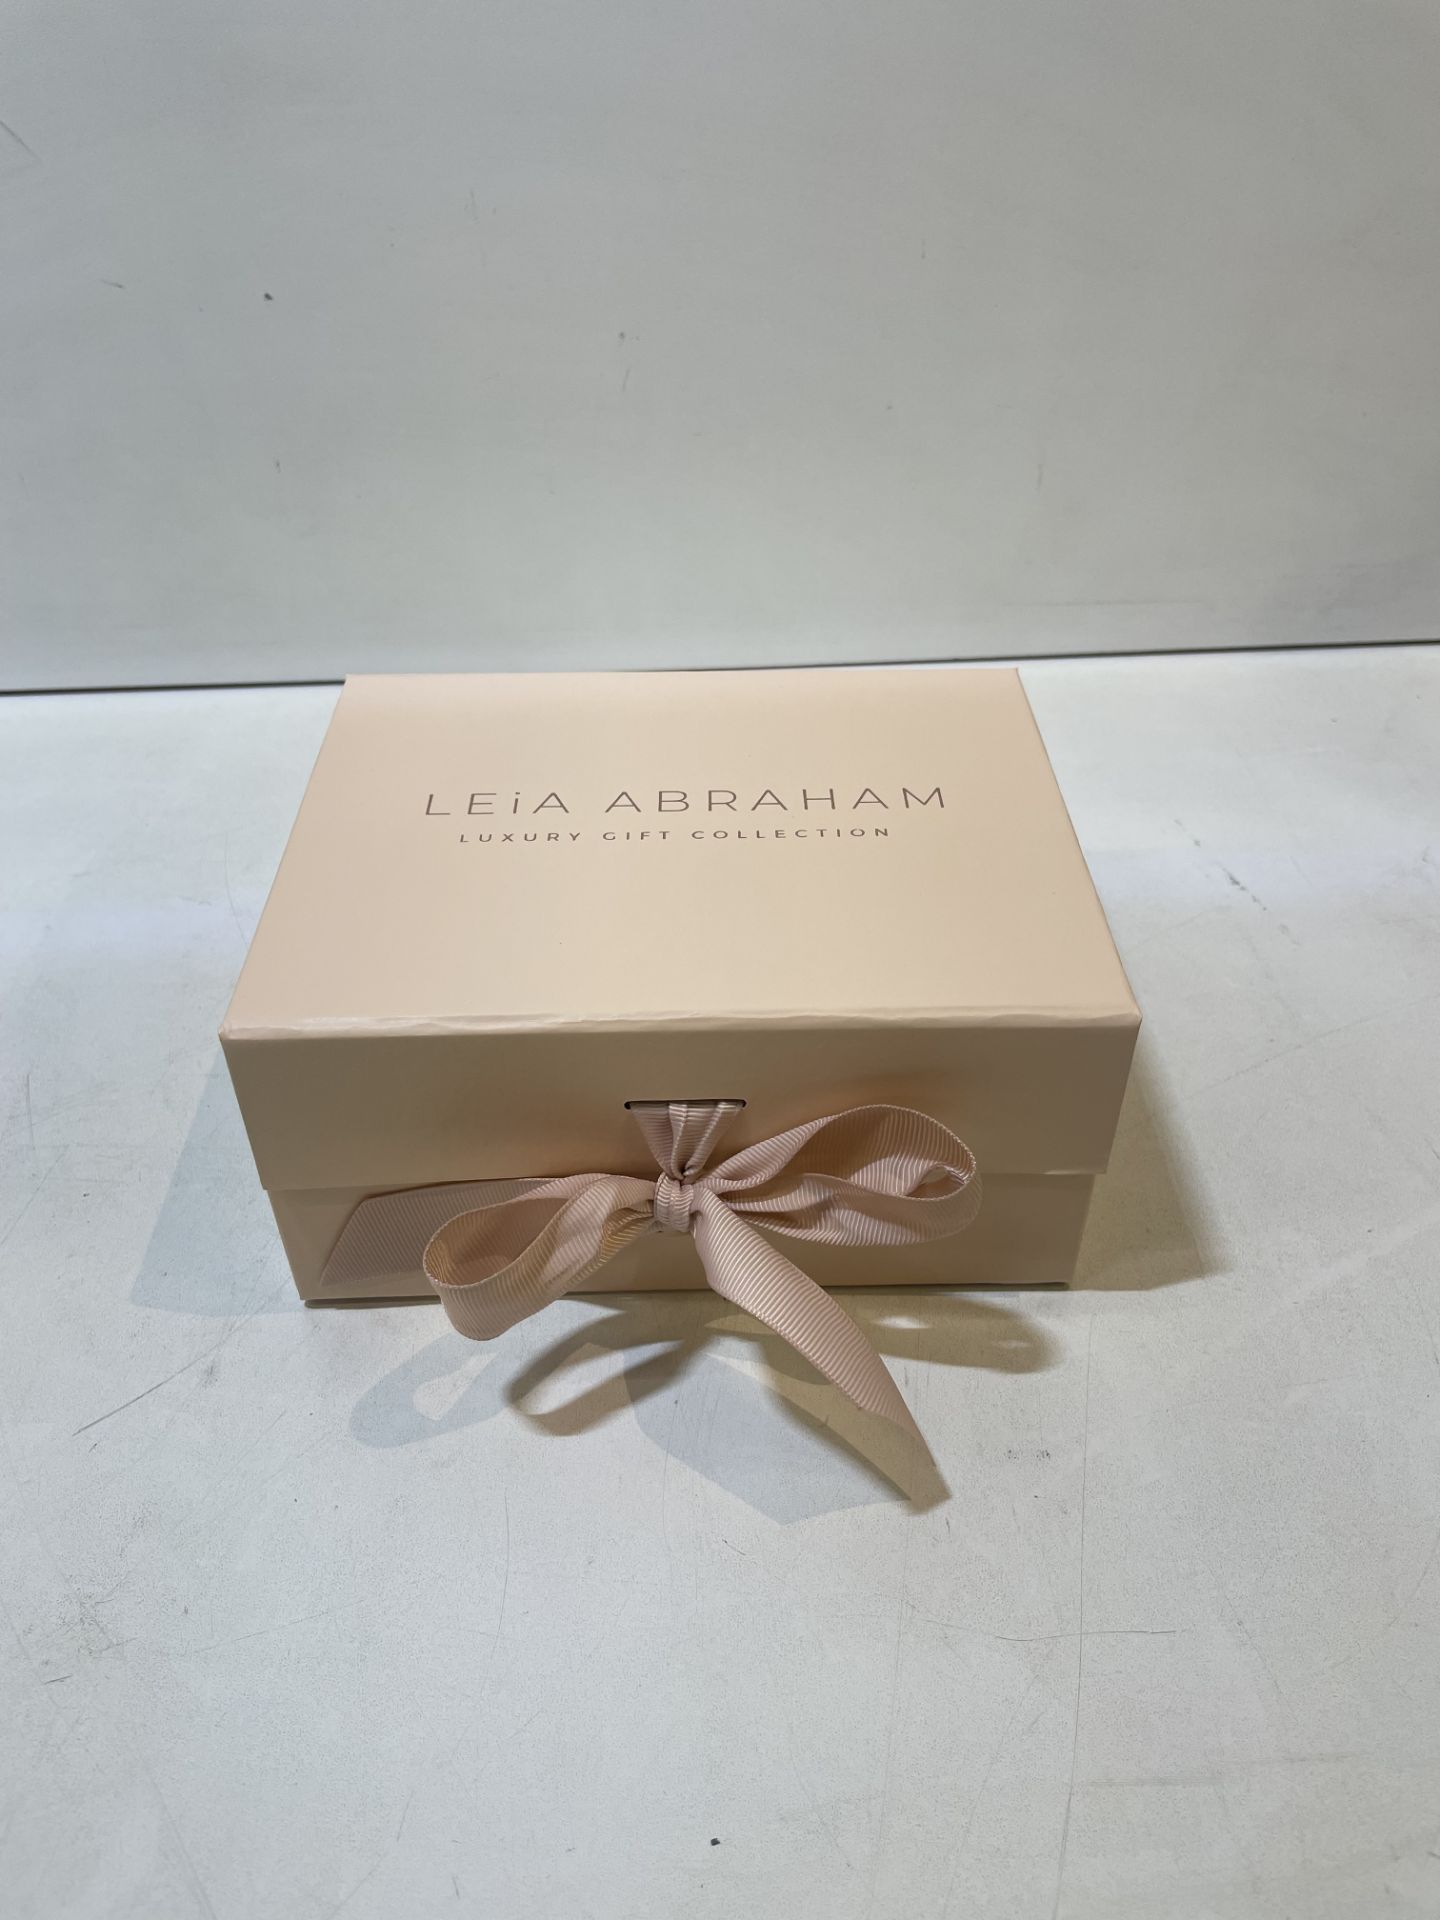 6 x Gift Boxes For Her | Each Box Contains: Earrings and Scented Candle - Image 4 of 4